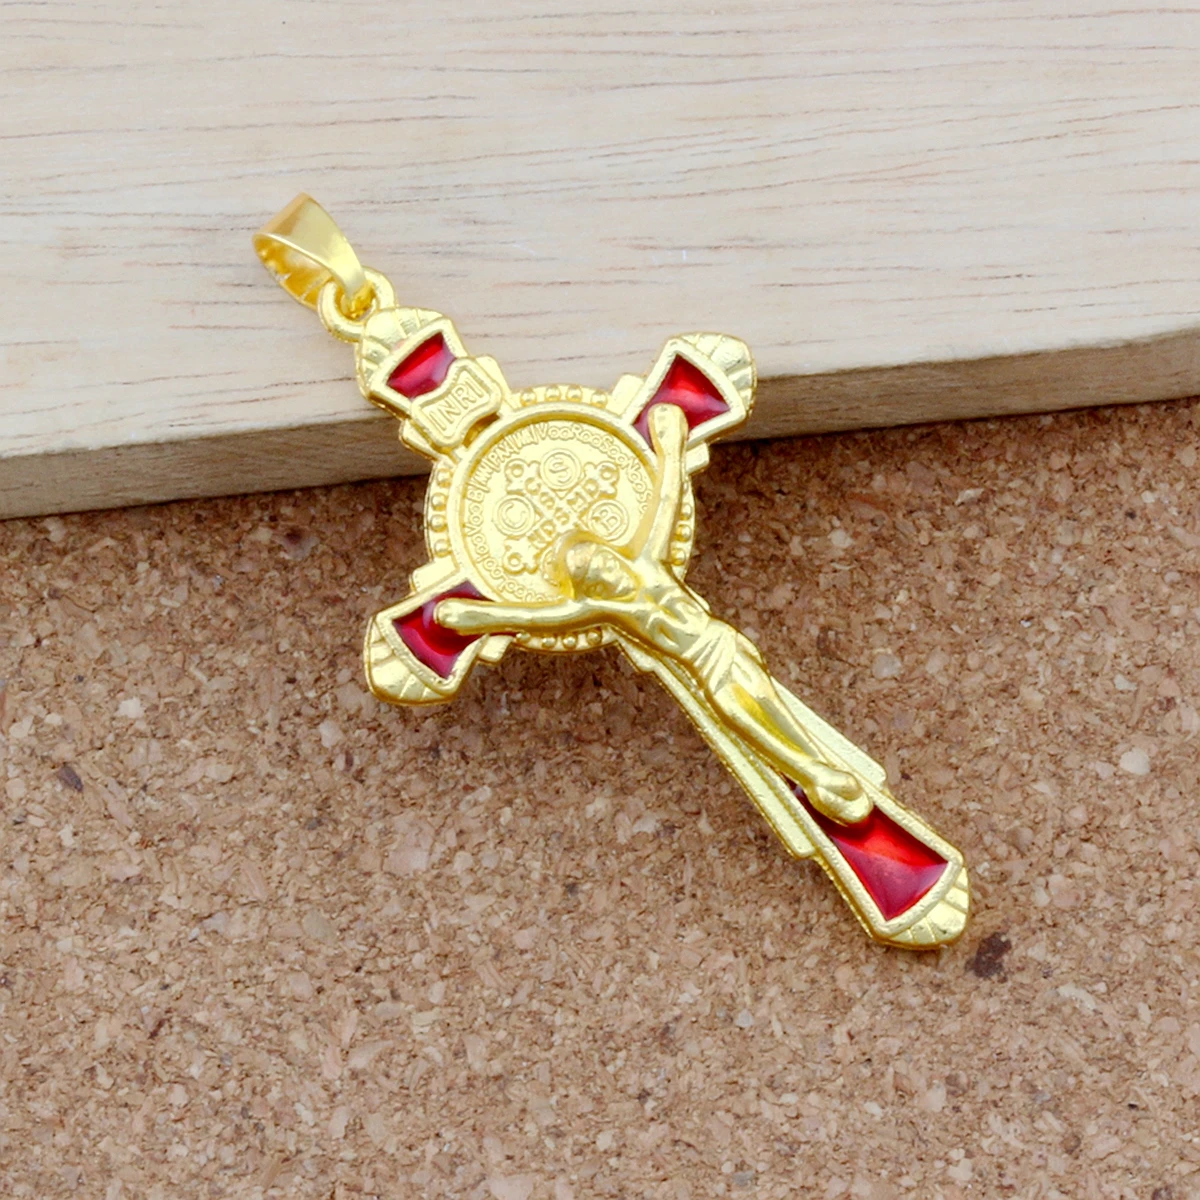 

2Pcs Red Enamel Saint Benedict Medal Crucifixion Cross Religion Charm Pendants For Jewelry Making Necklace Findings 28.5x56.2mm